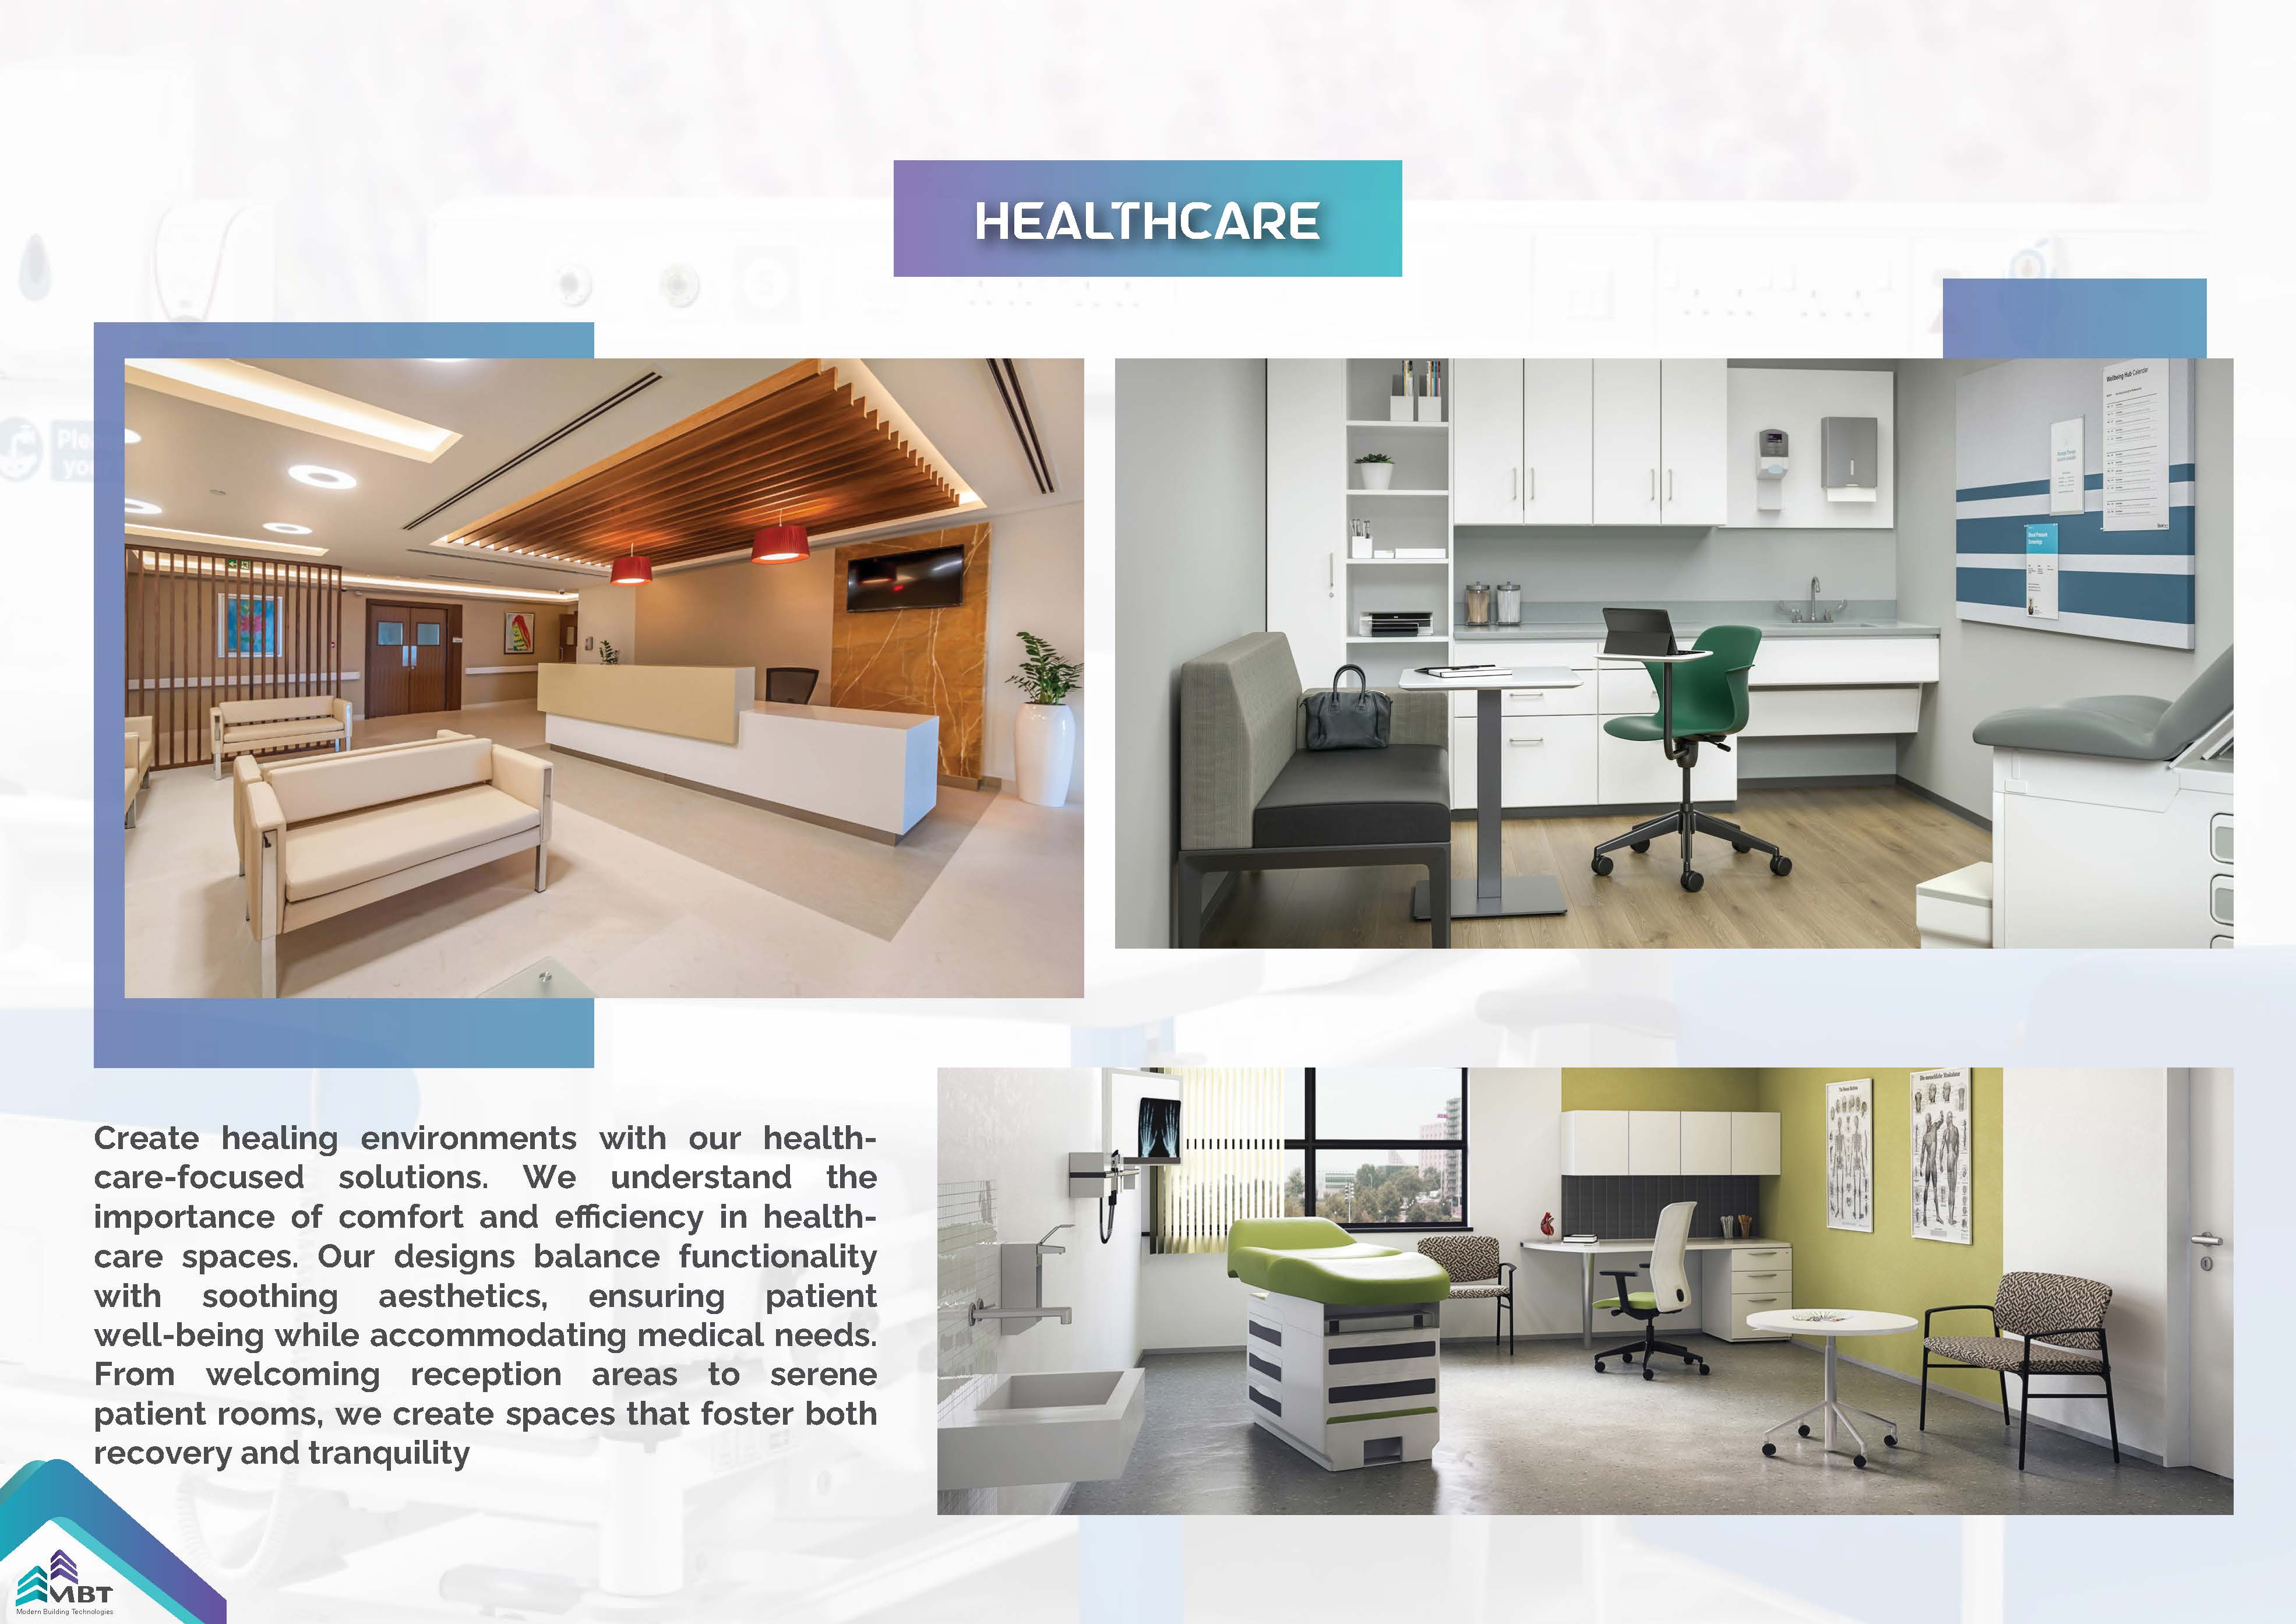 mbt fit out commercial healthcare